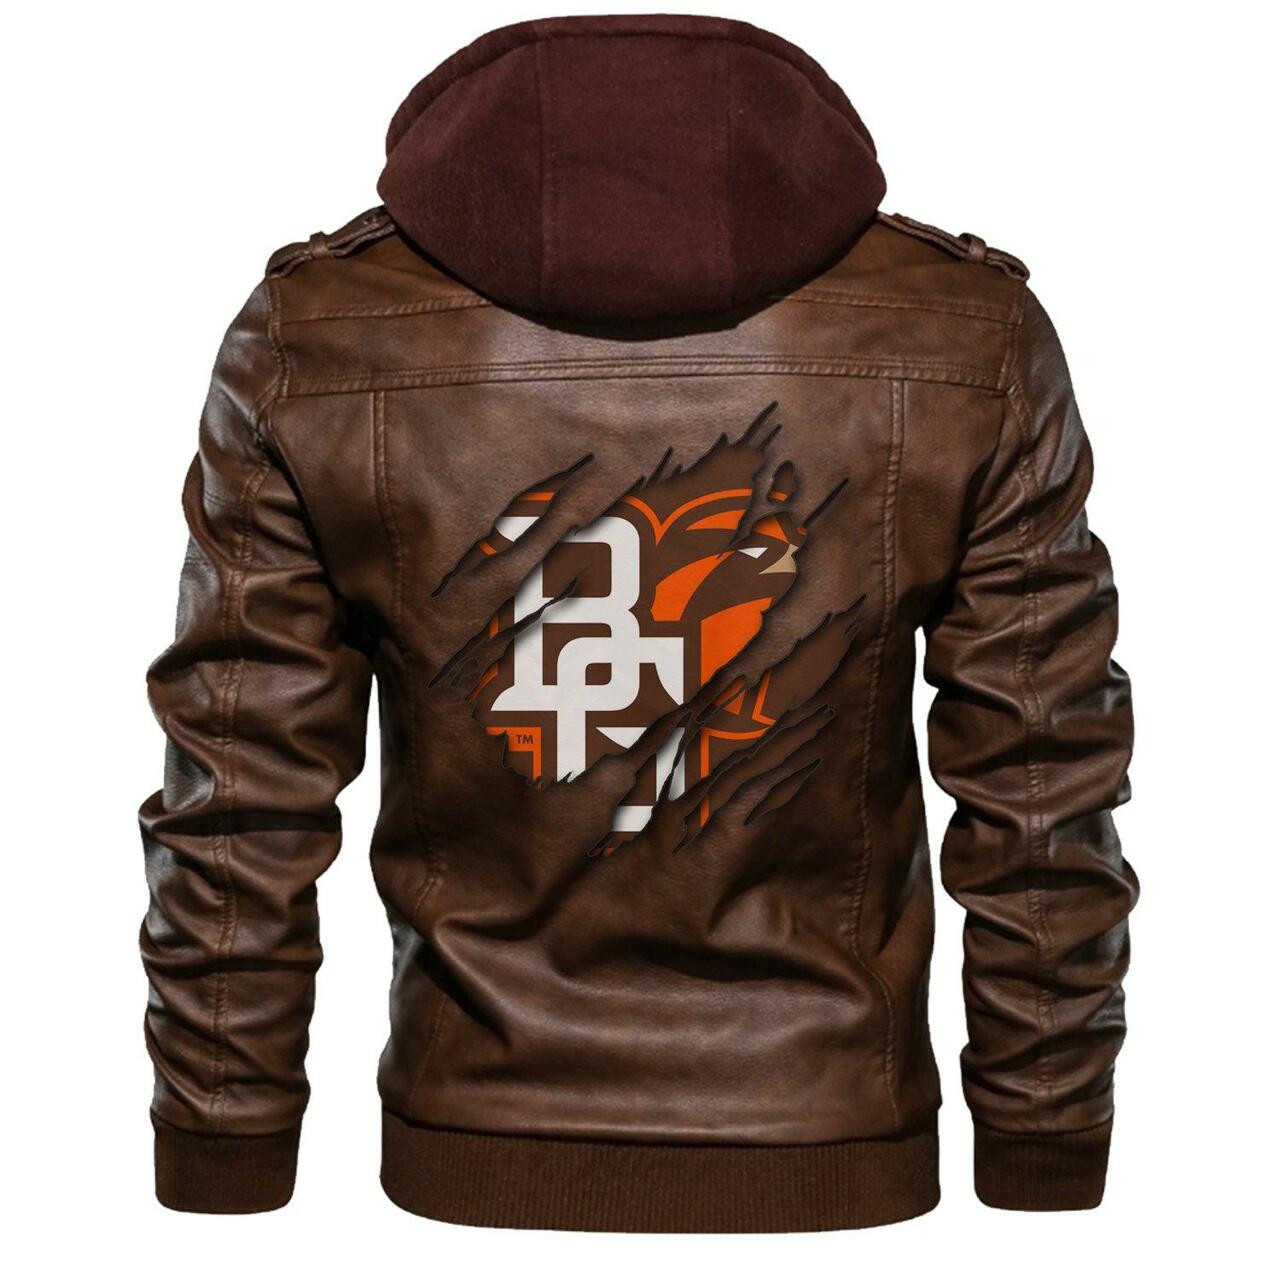 Nice leather jacket For you 264